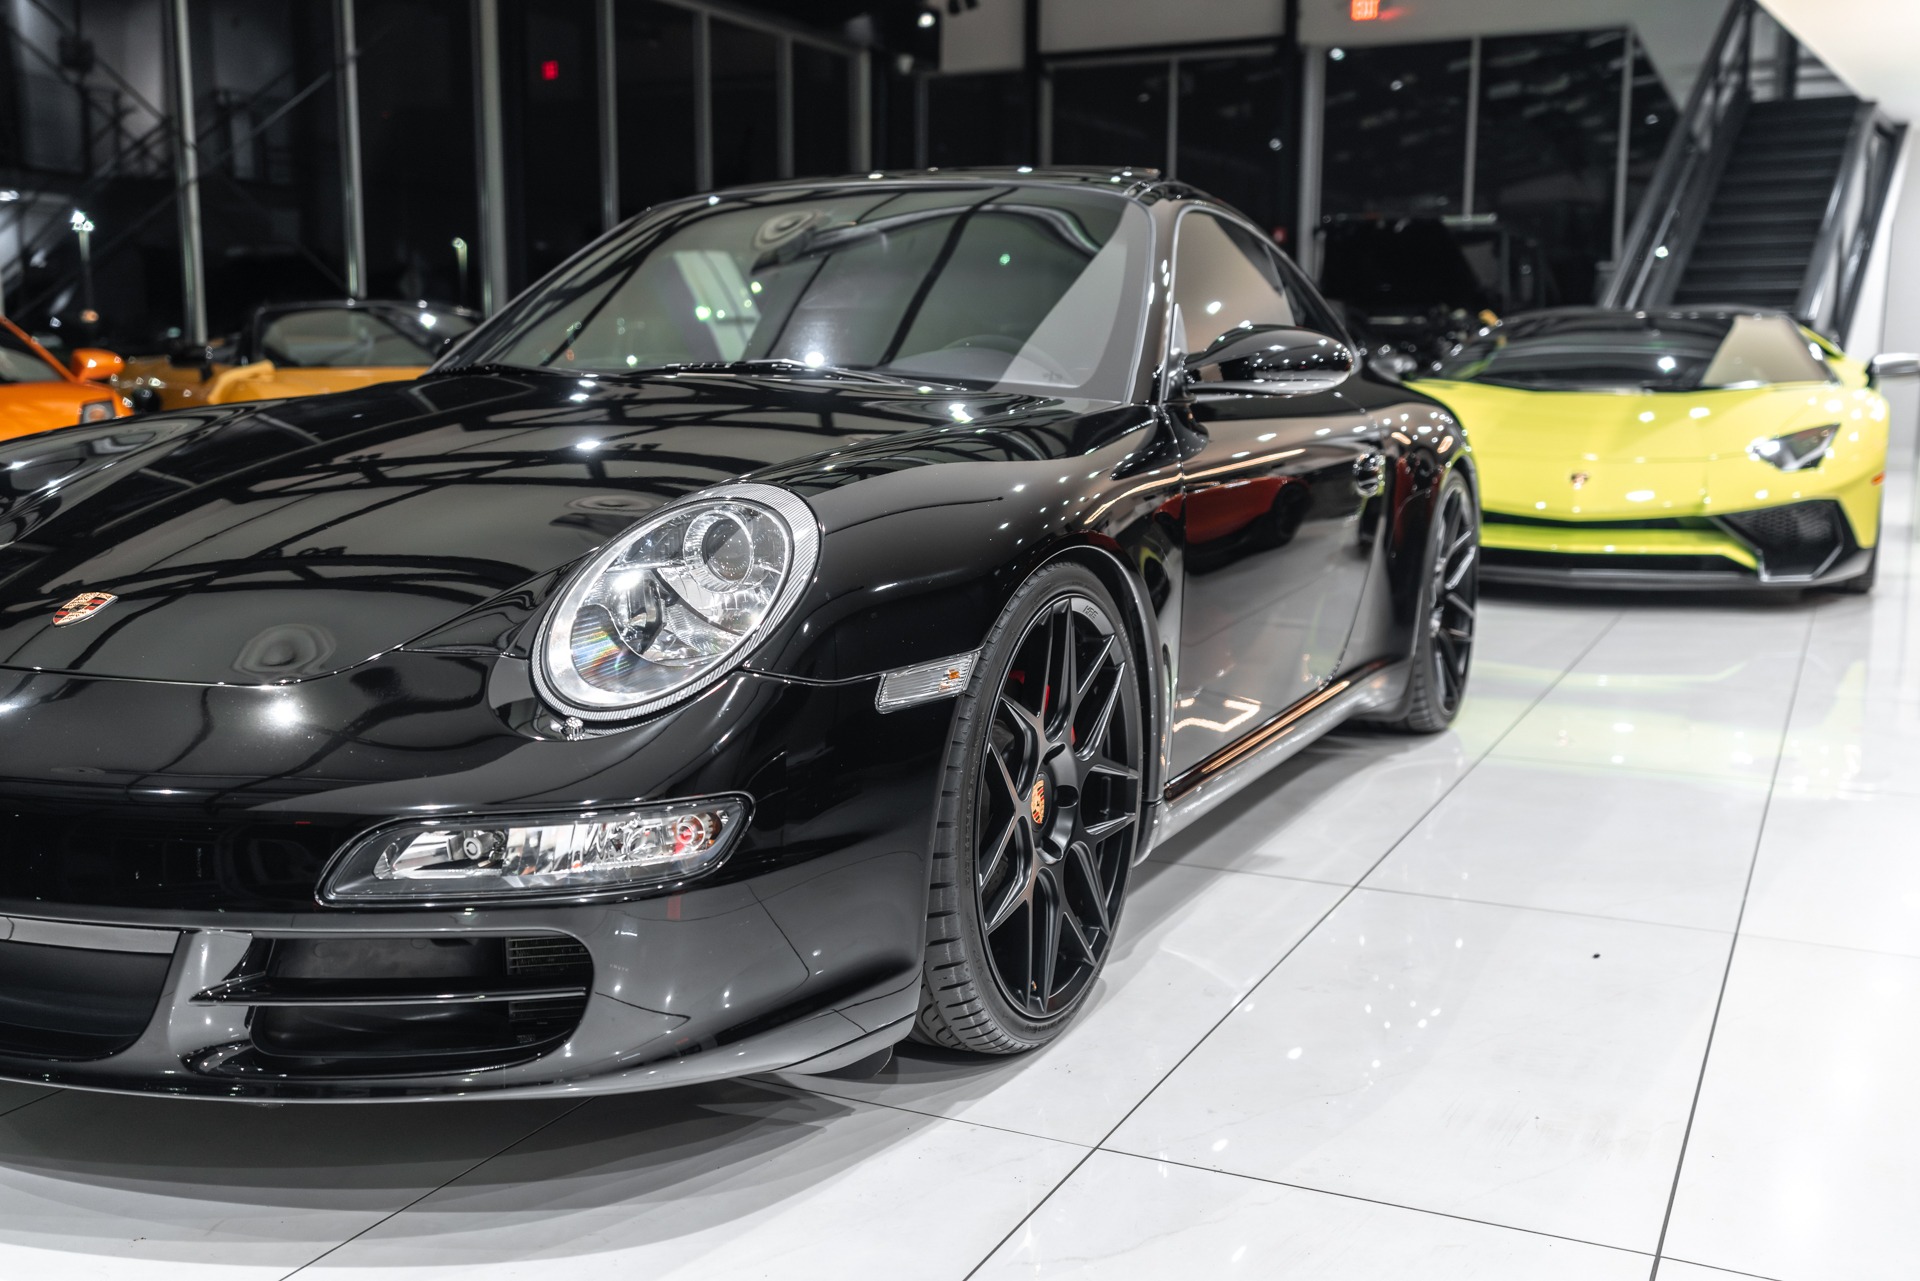 Used-2005-Porsche-911-Carrera-S-Coupe-6-Speed-Manual-FabSpeed-Exhaust-HRE-Wheels-SERVICED